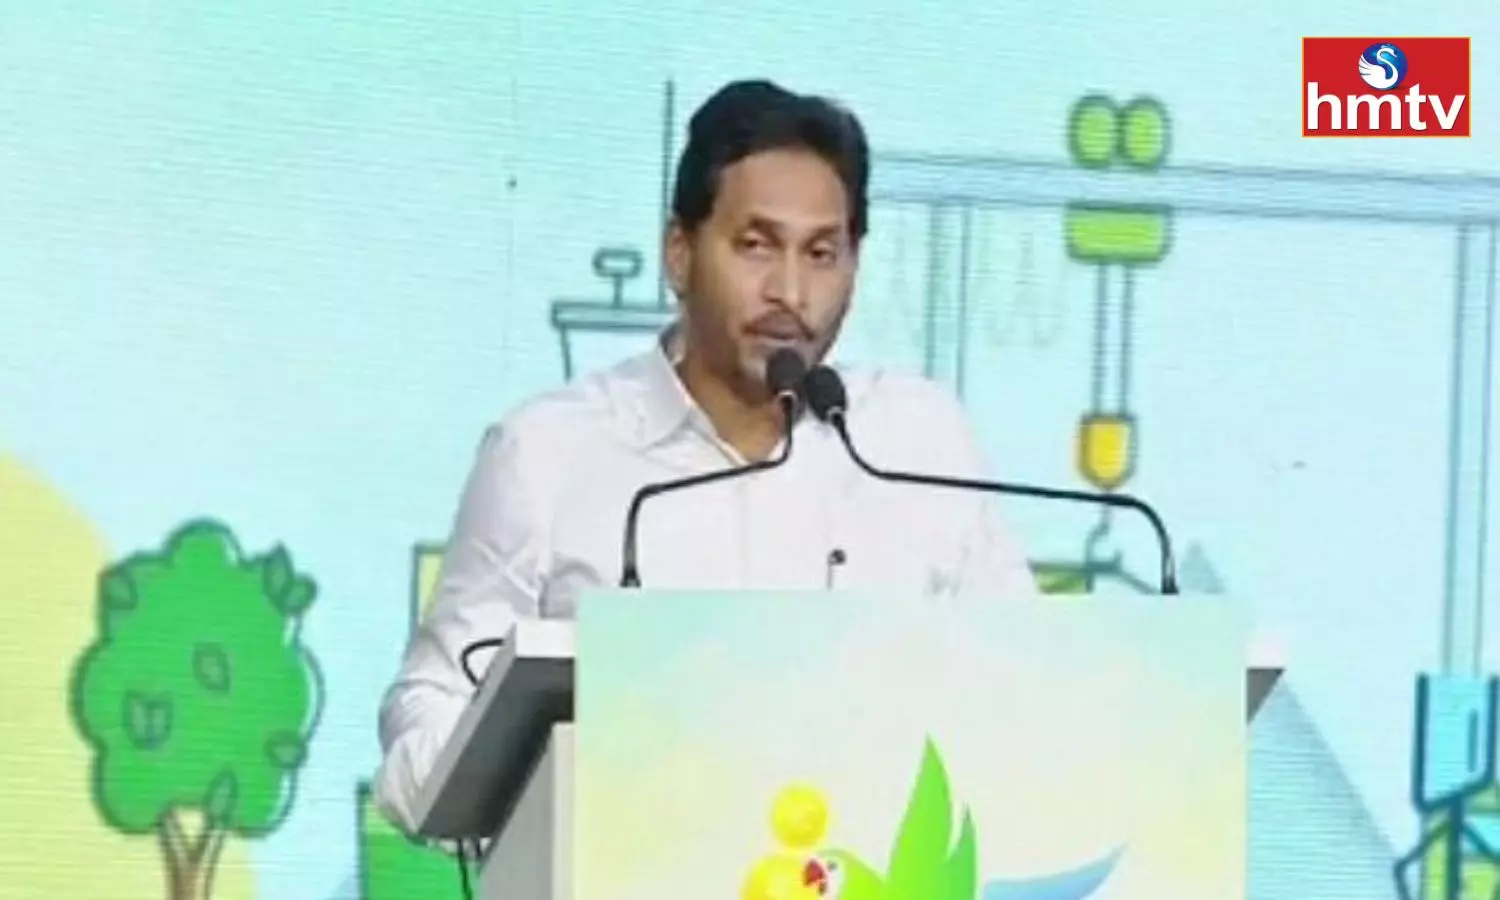 State has Received 340 Investment Proposals in GIS Says cm Jagan